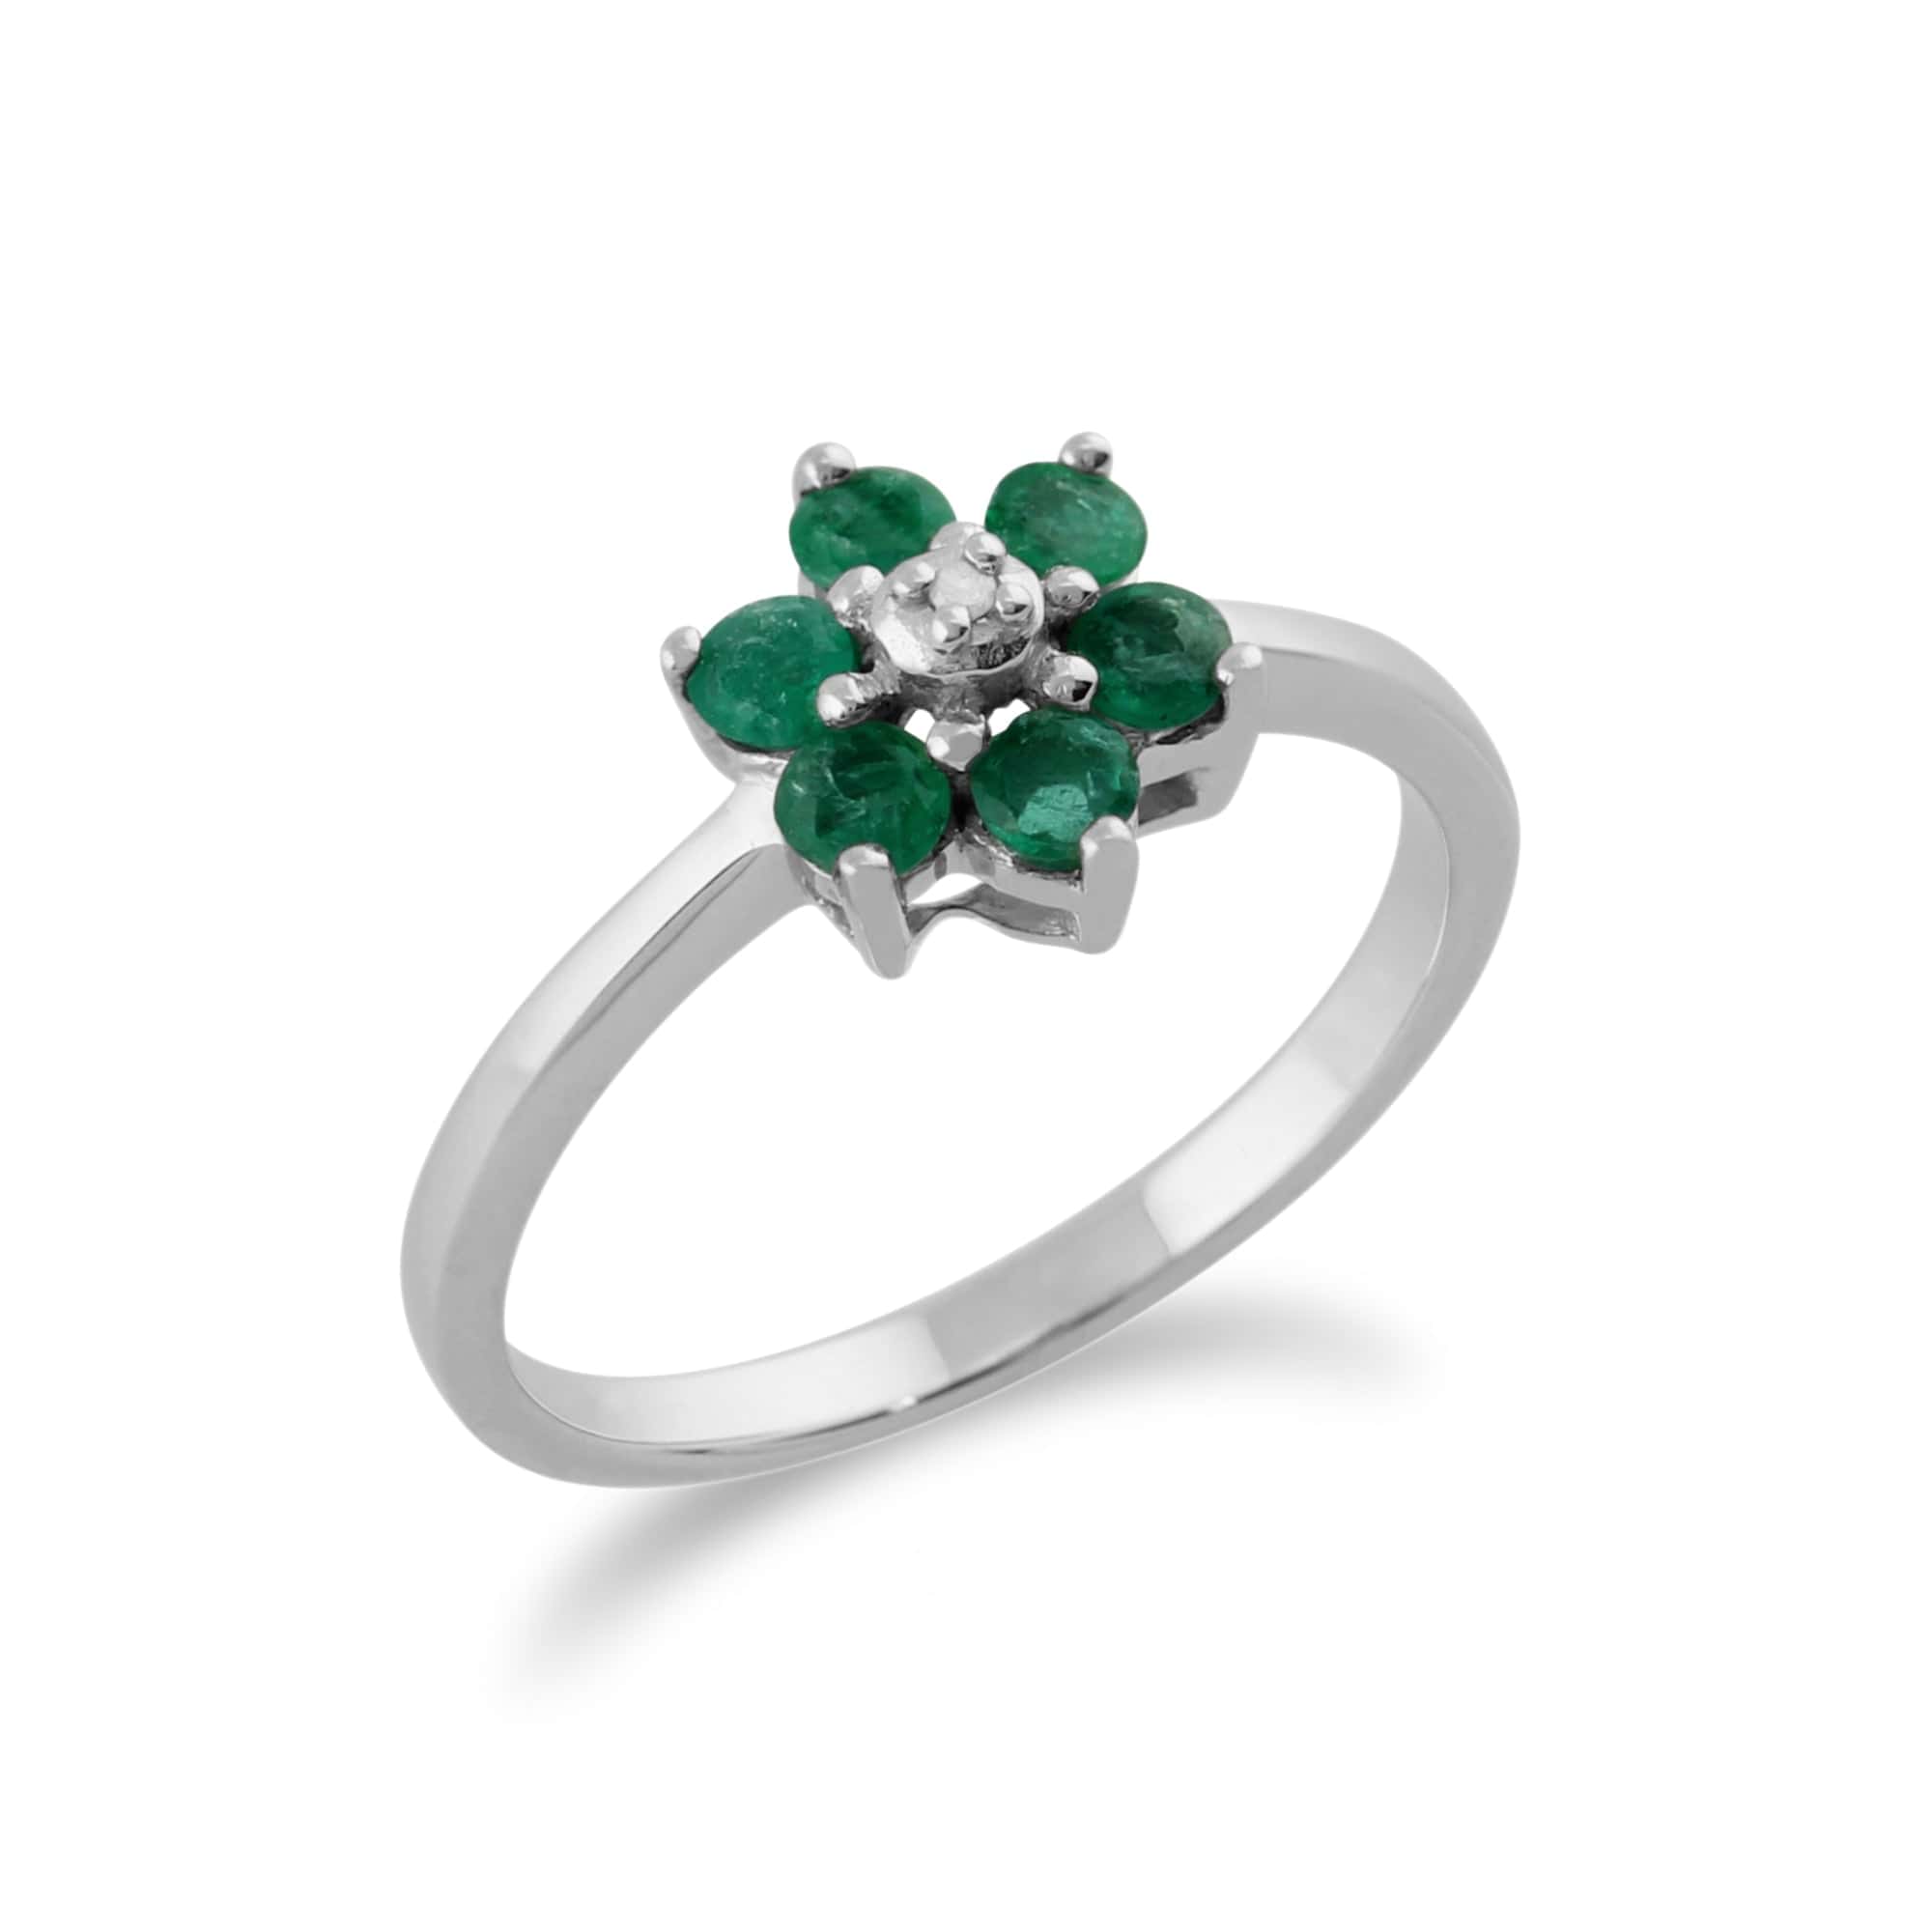 117R0051019 Floral Round Emerald & Diamond Cluster Ring in 9ct White Gold 2